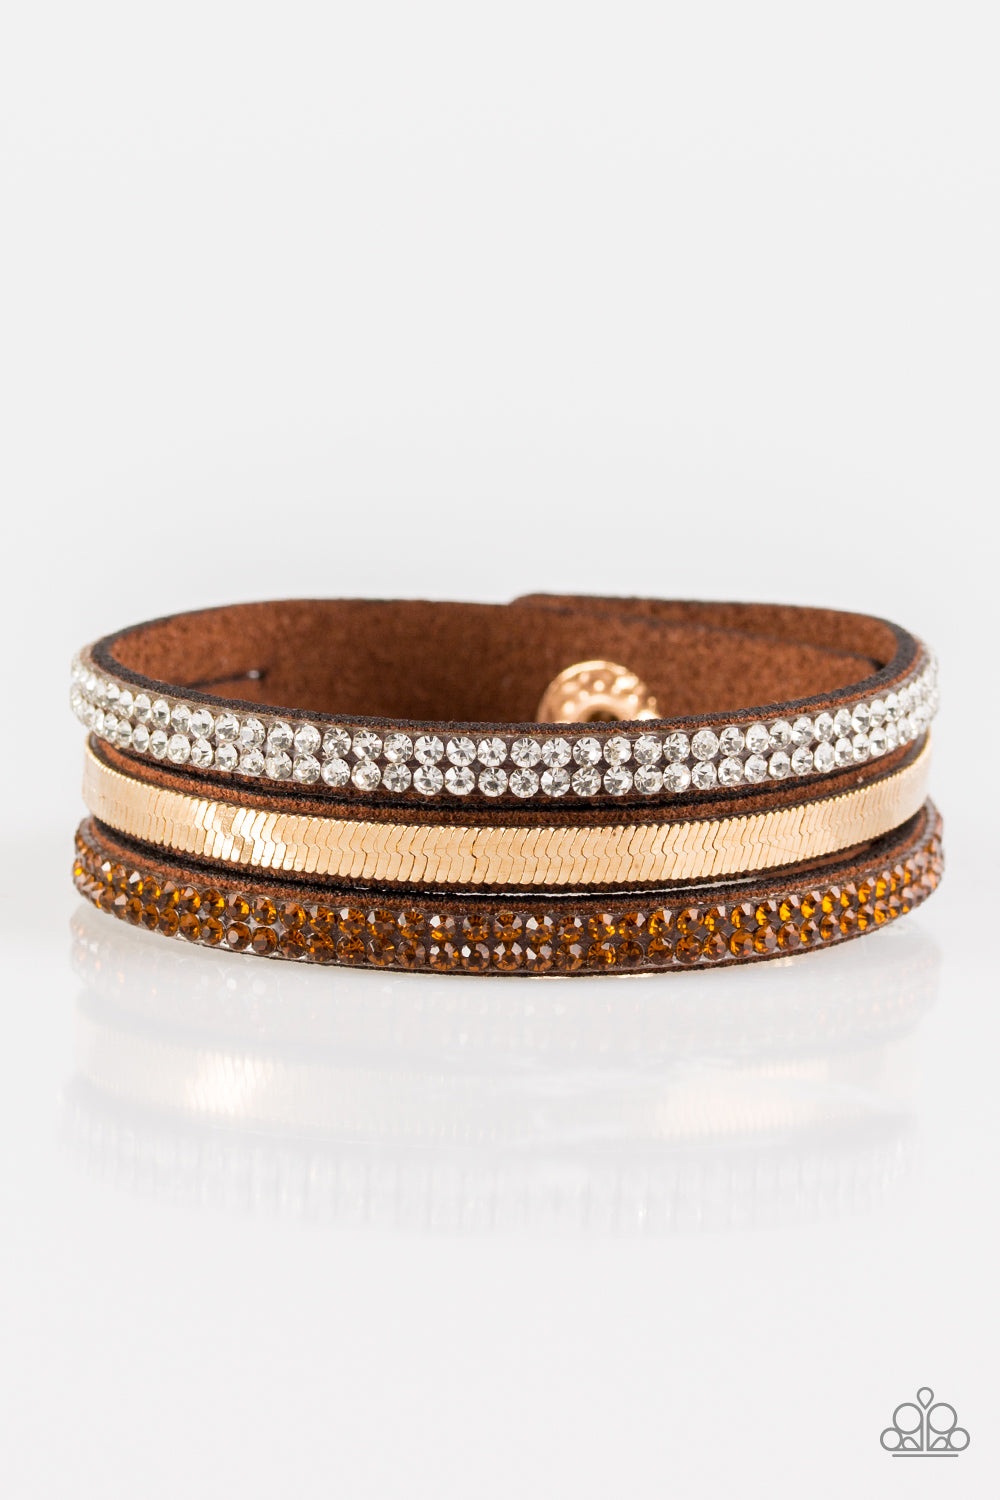 Paparazzi Accessories - I Mean Business - Brown Snap Bracelet - Alies Bling Bar